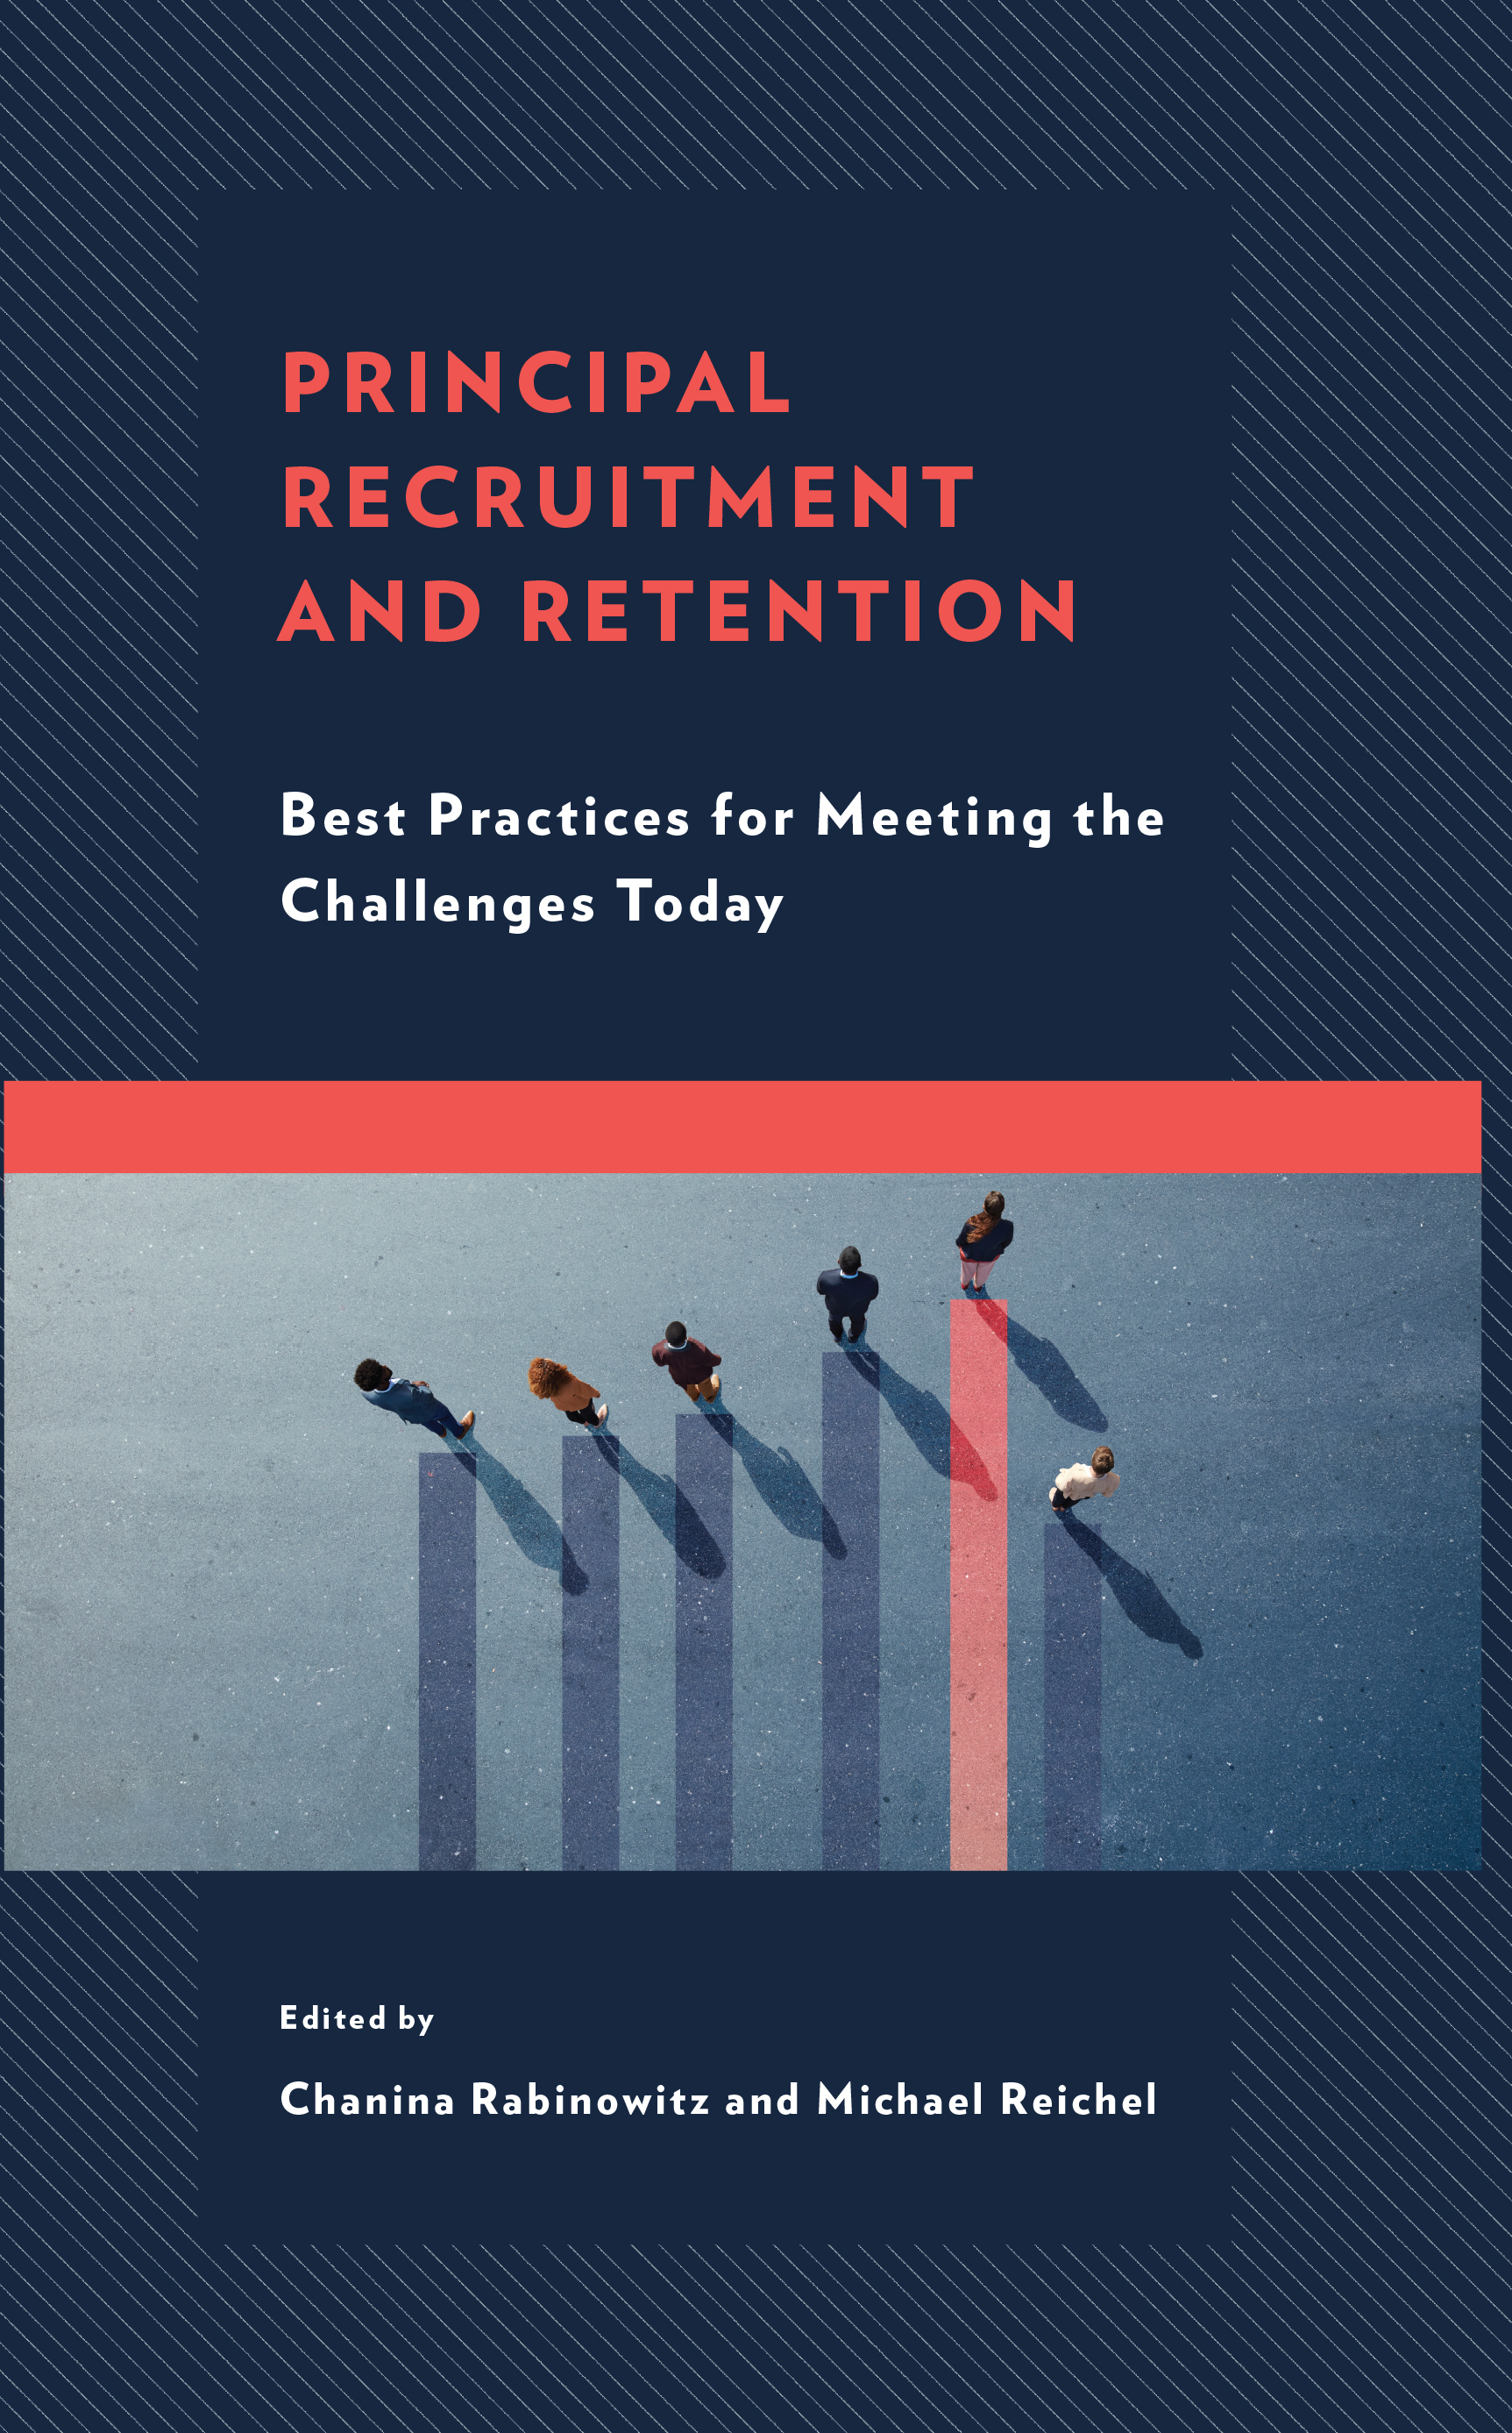 Principal Recruitment and Retention: Best Practices for Meeting the Challenges Today